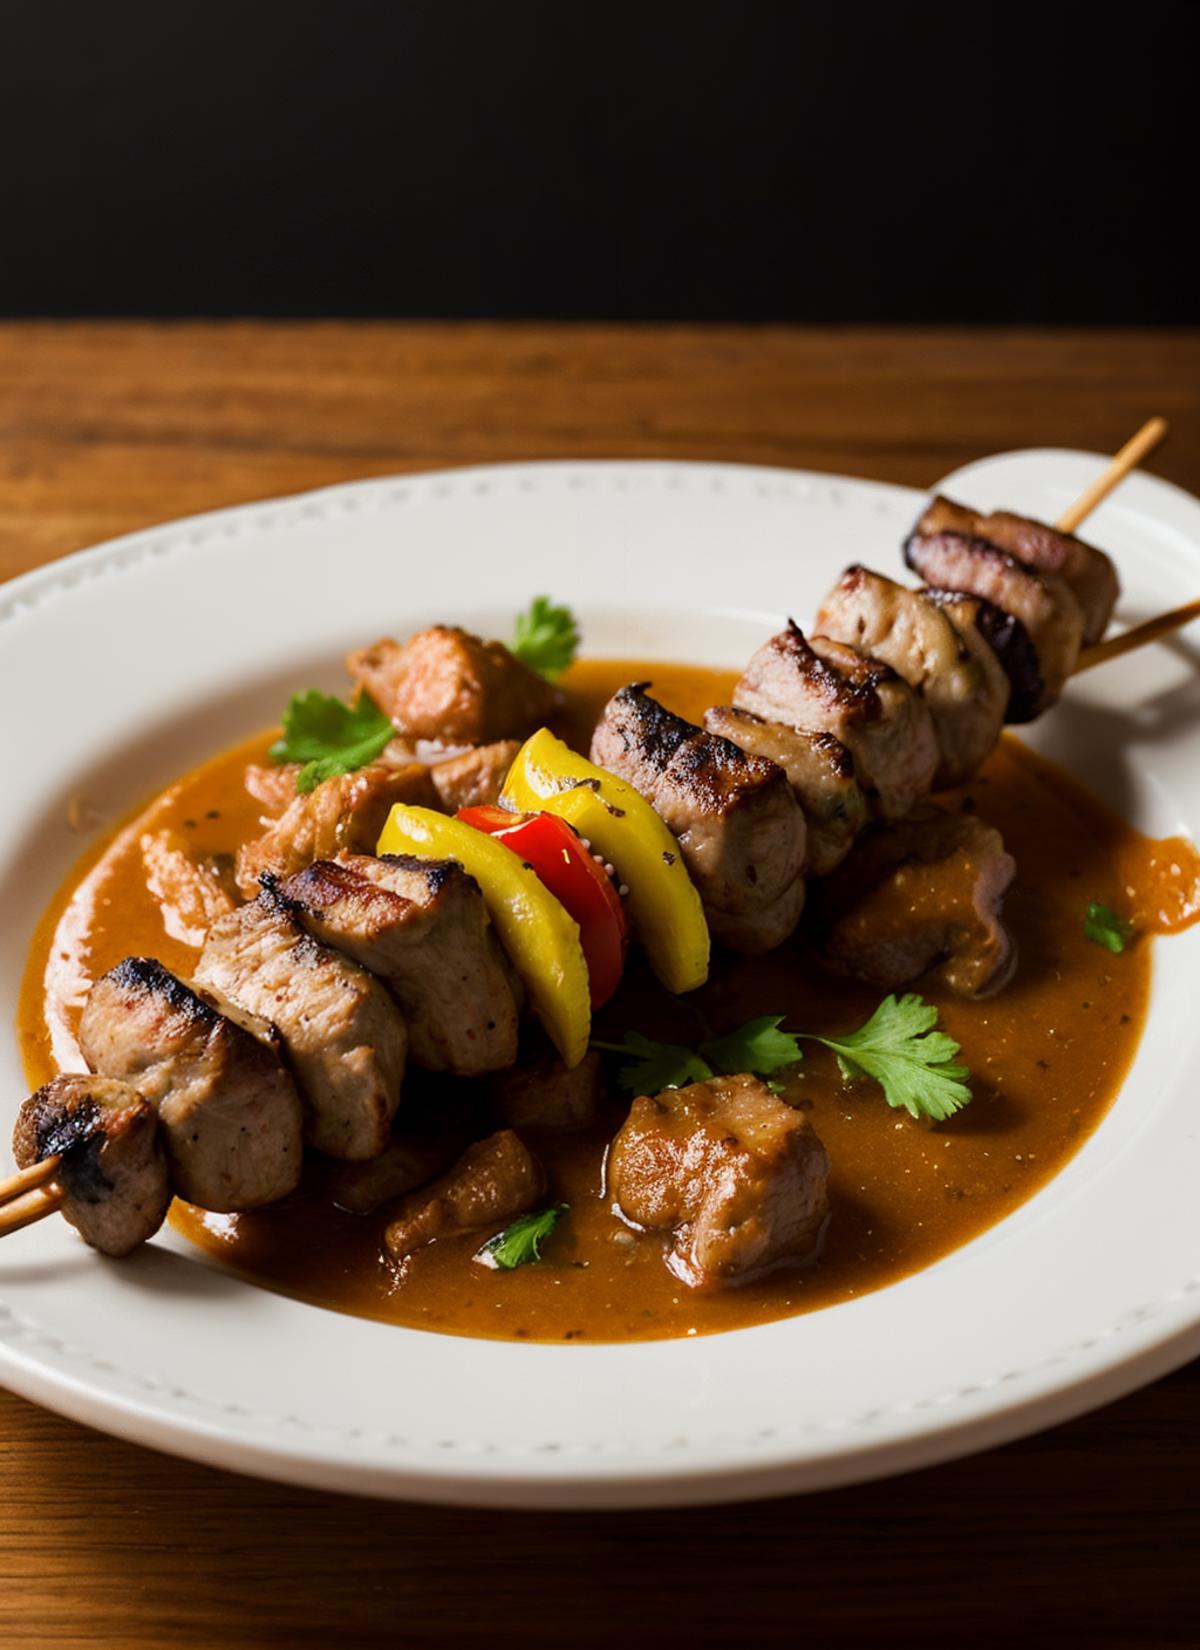 A Delicious Meal of Kebab Skewers with Vegetables and Sauce on a White Plate